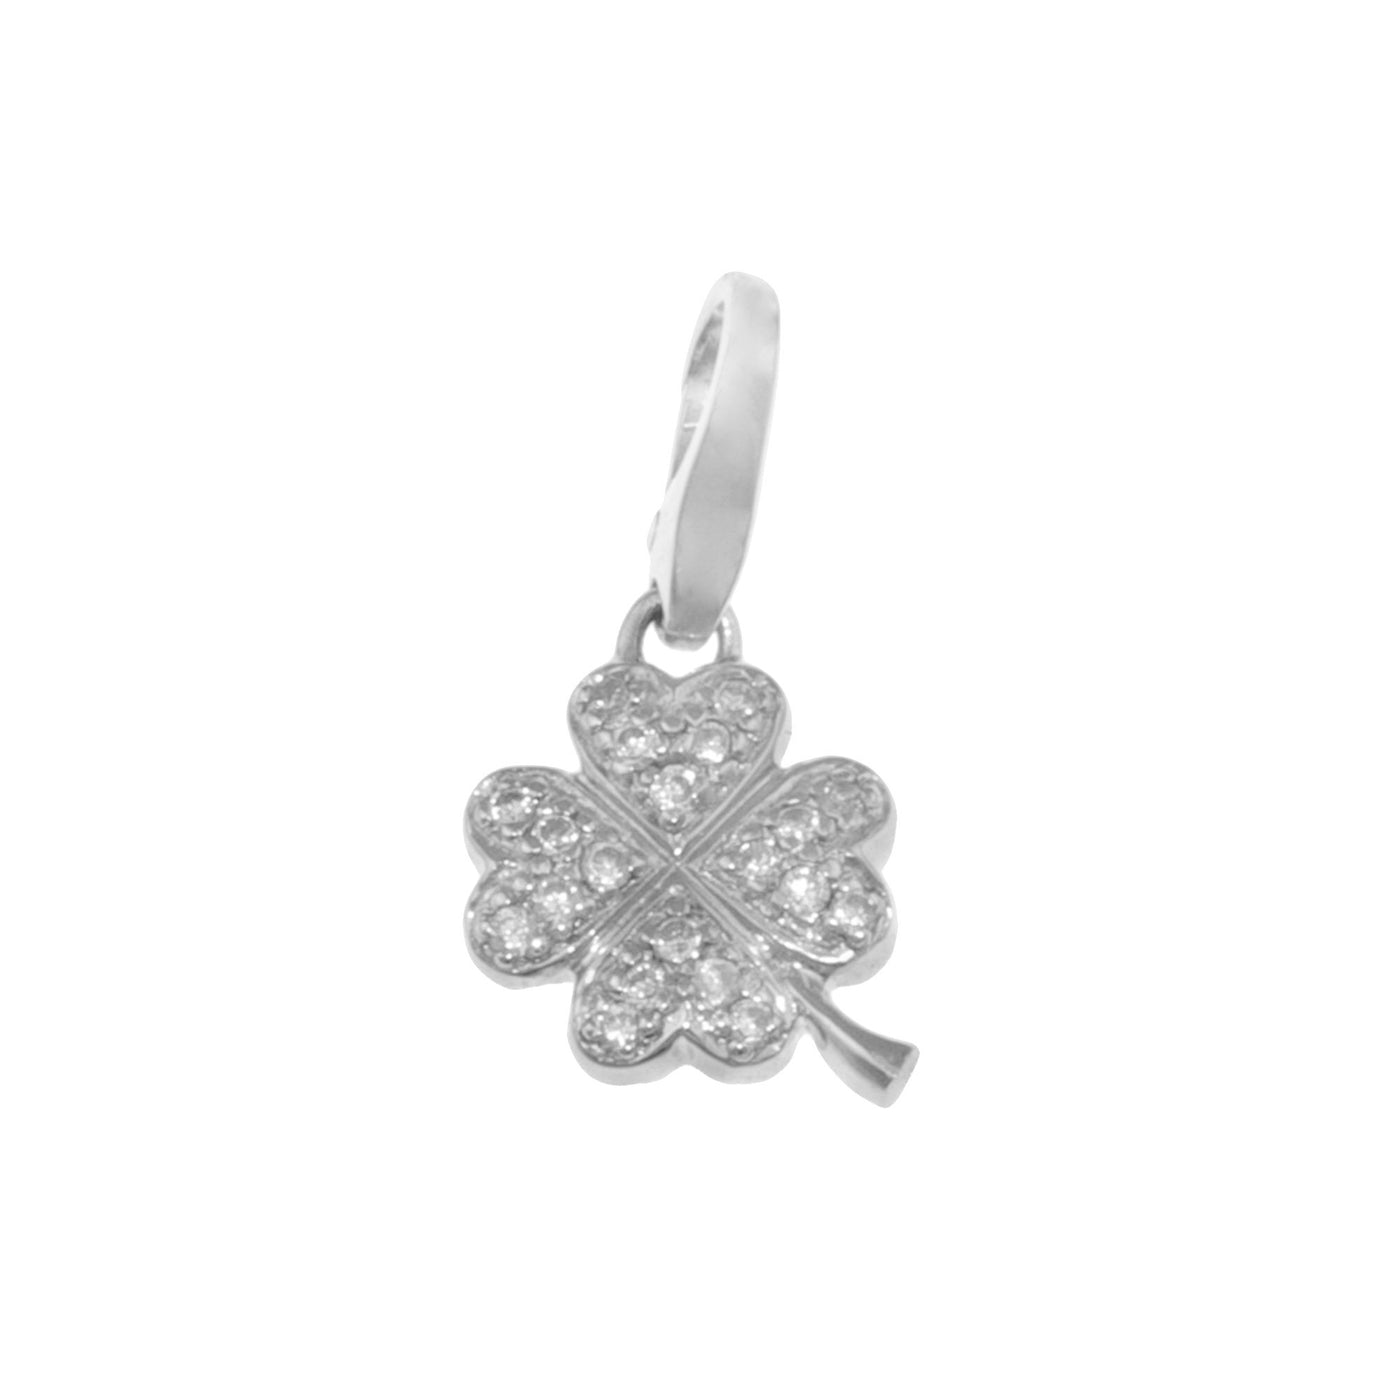 Rebecca Sloane Sterling Silver 4-Leaf Clover With White Cz Charm